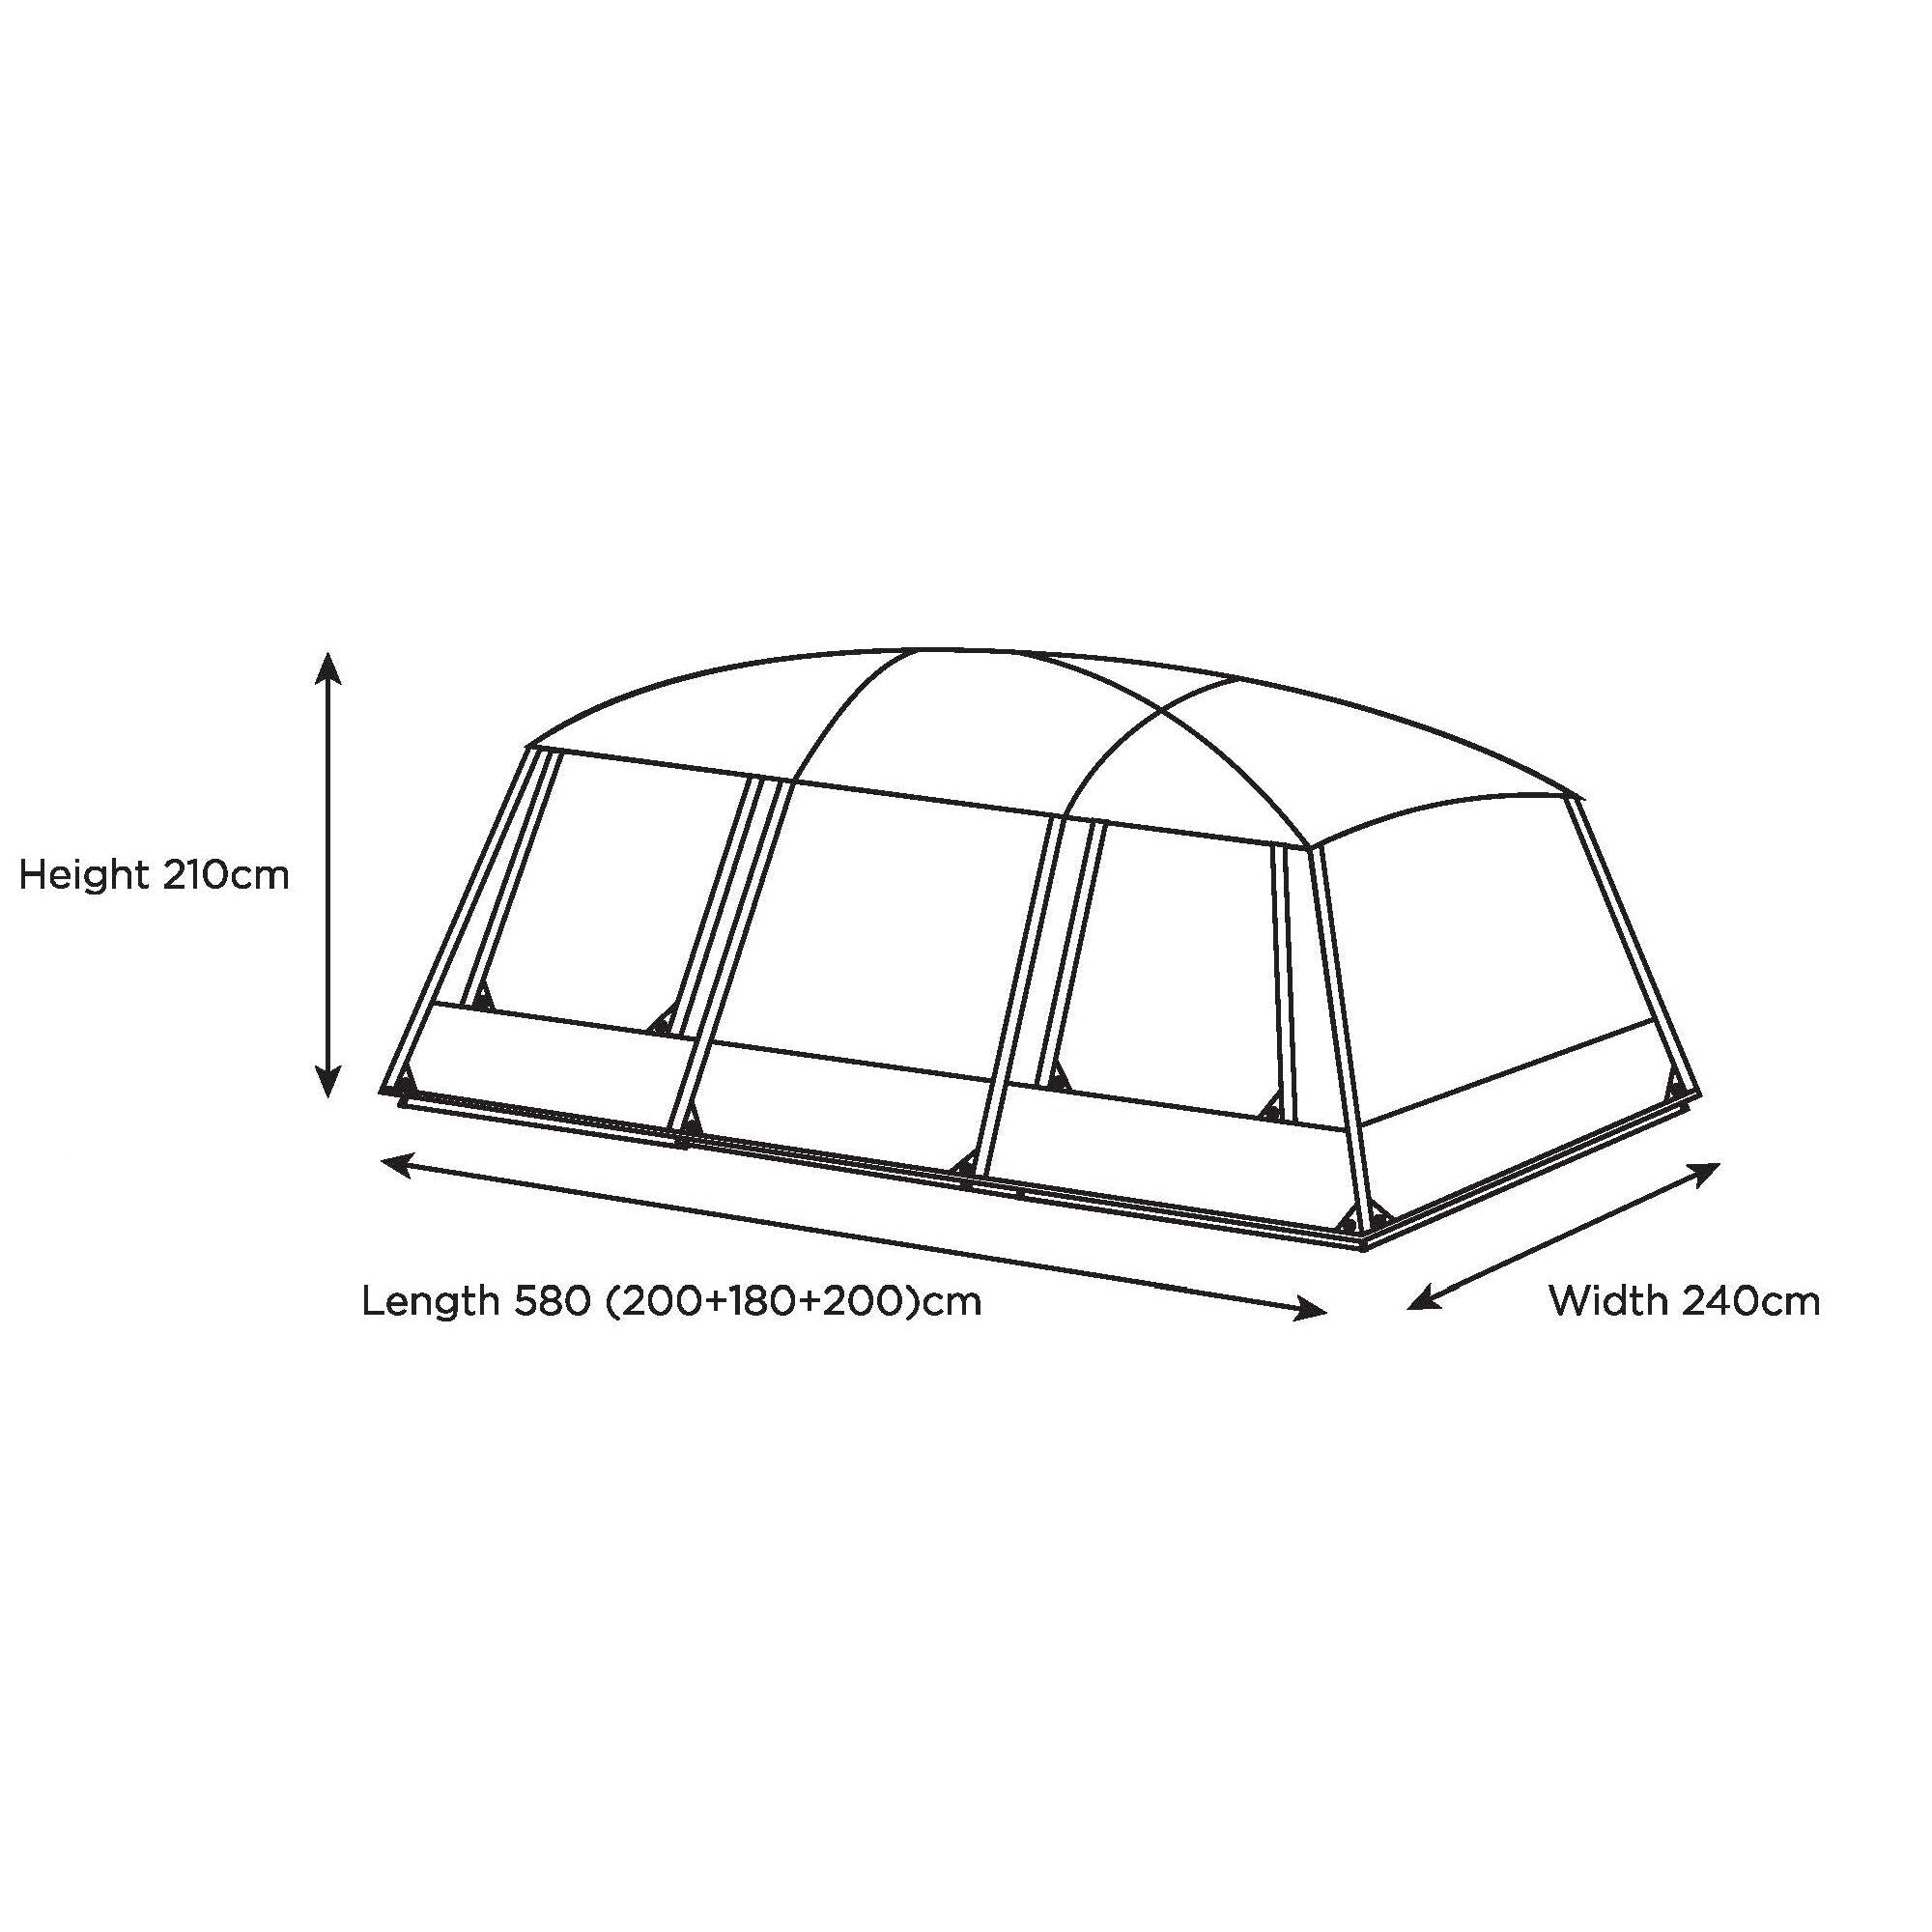 Quest Outdoors Cabin 10 Tent